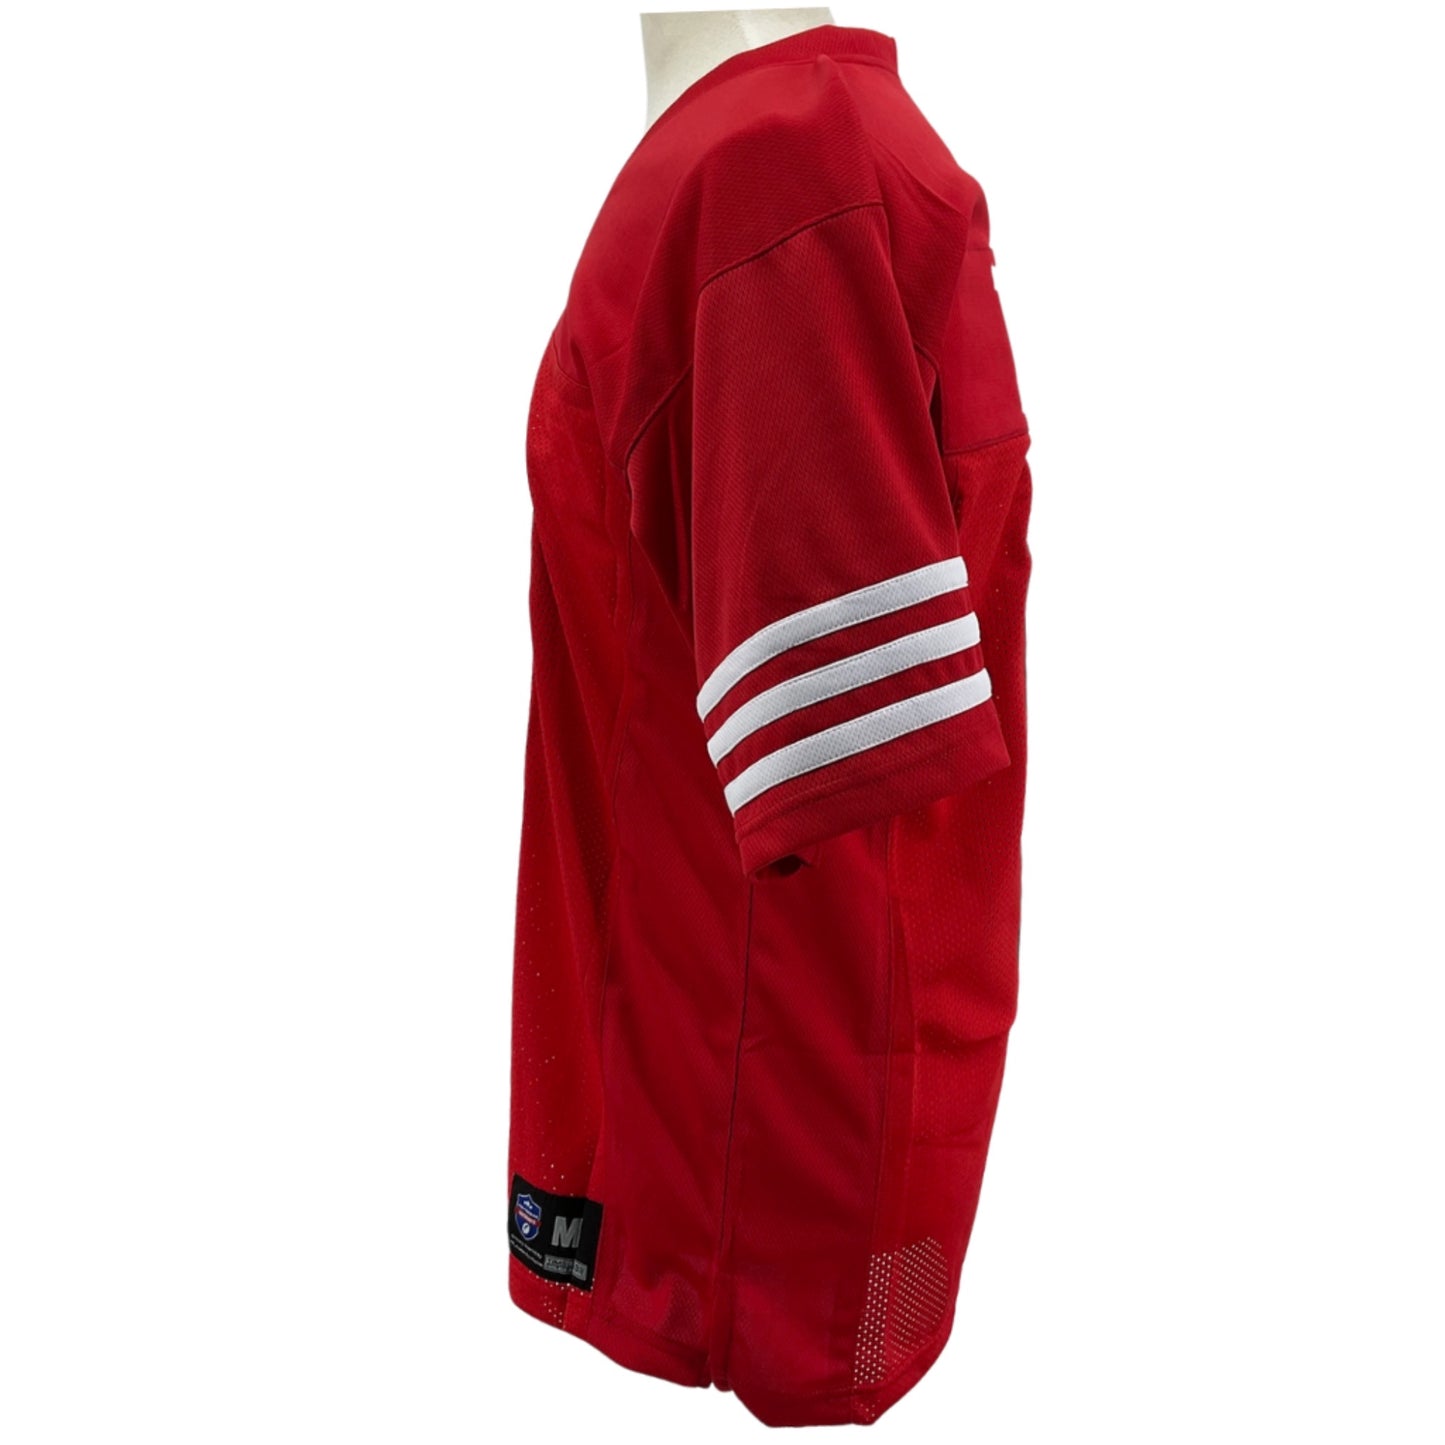 Steve Young Jersey Red w/ Drop Shadow San Francisco | M-5XL Custom Sewn Stitched